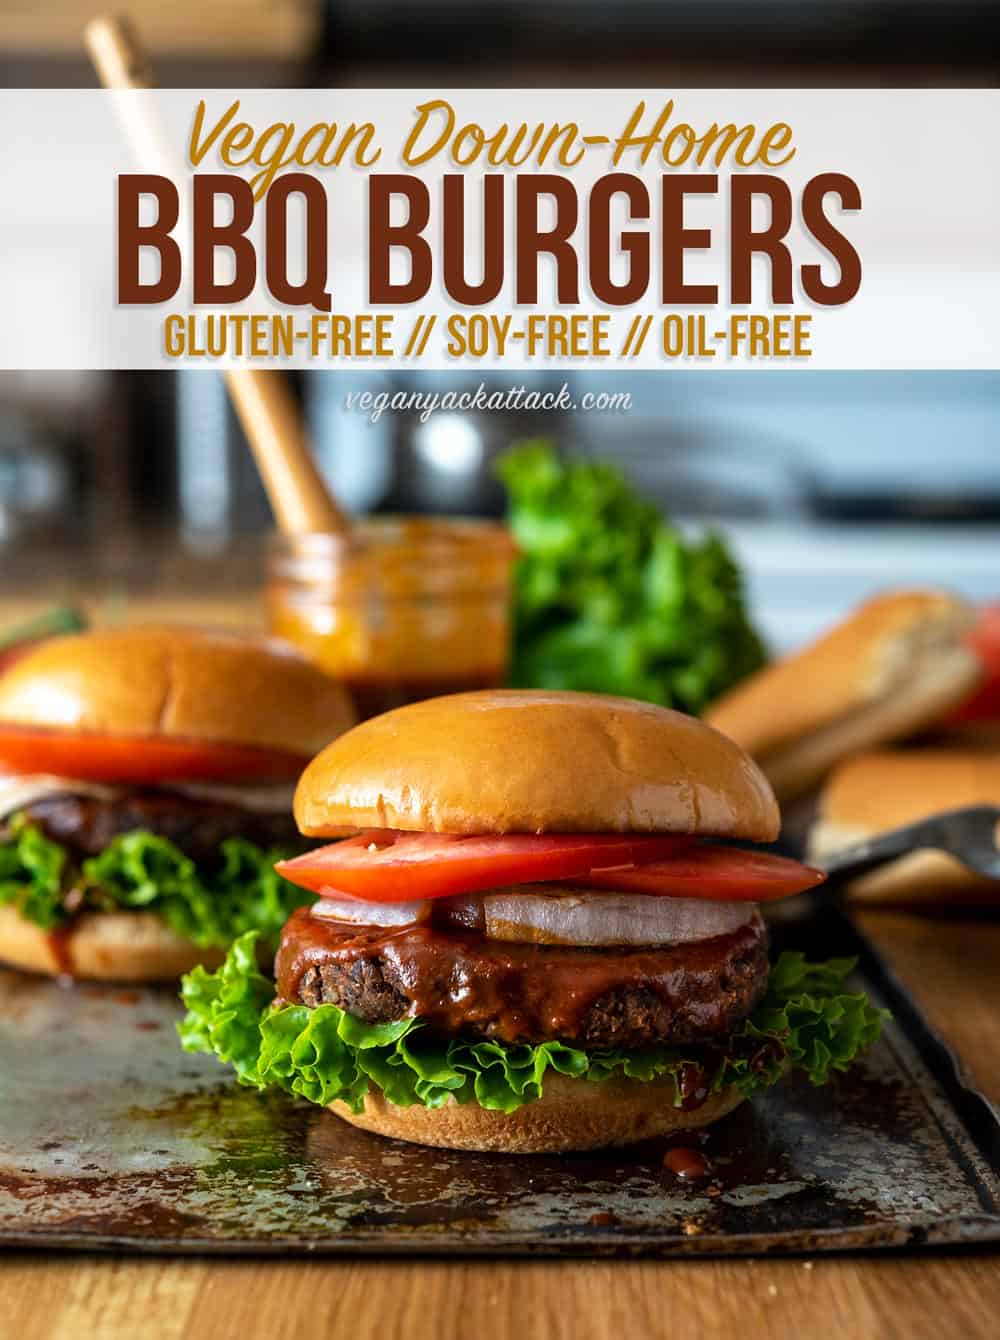 We're still in the heart of grilling season, and what better way to whet that appetite than with a Down Home BBQ Burger from the Vegan Burgers and Burritos Cookbook, by Sophia DeSantis? #vegan #bbq #burgers #vdbburgersandburritoscookbook